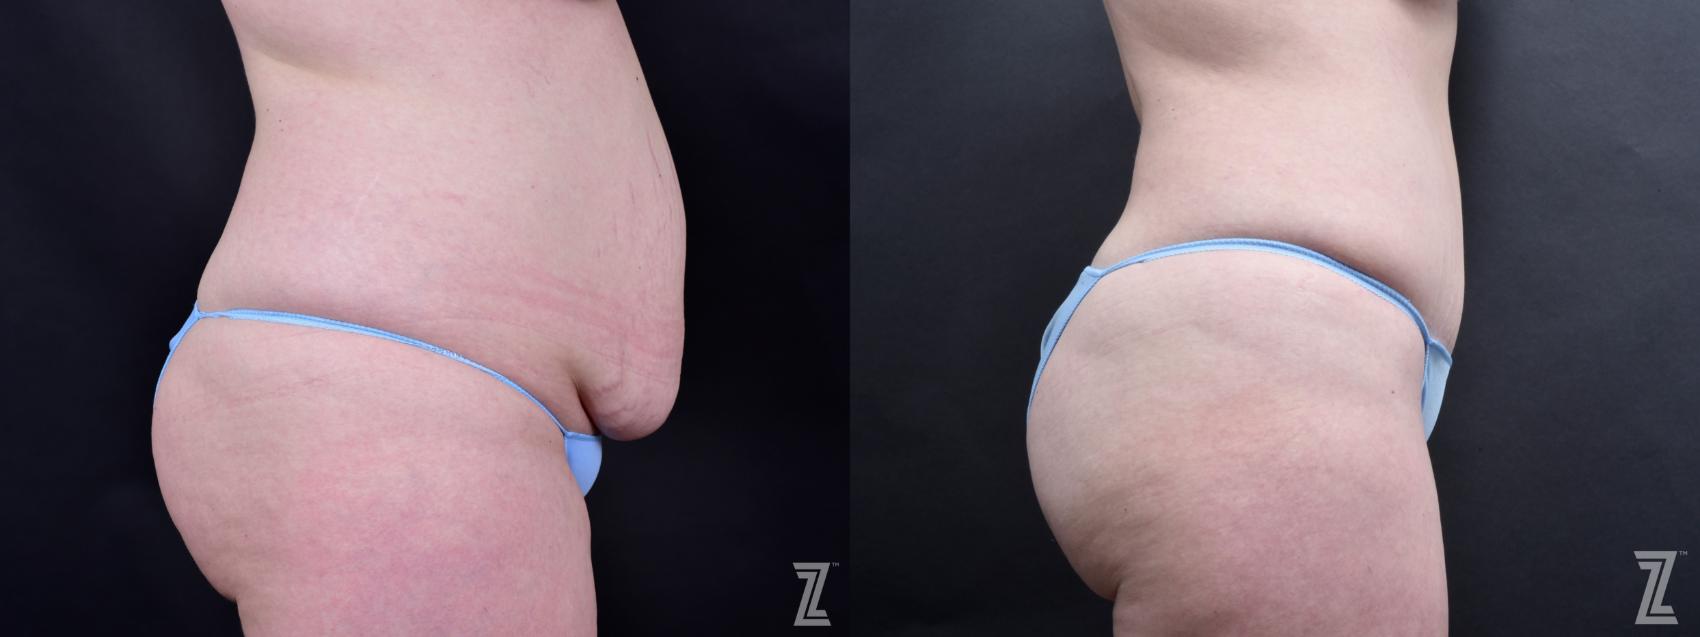 Tummy Tuck Before & After Photo | Austin, TX | The Piazza Center for Plastic Surgery & Advanced Skin Care